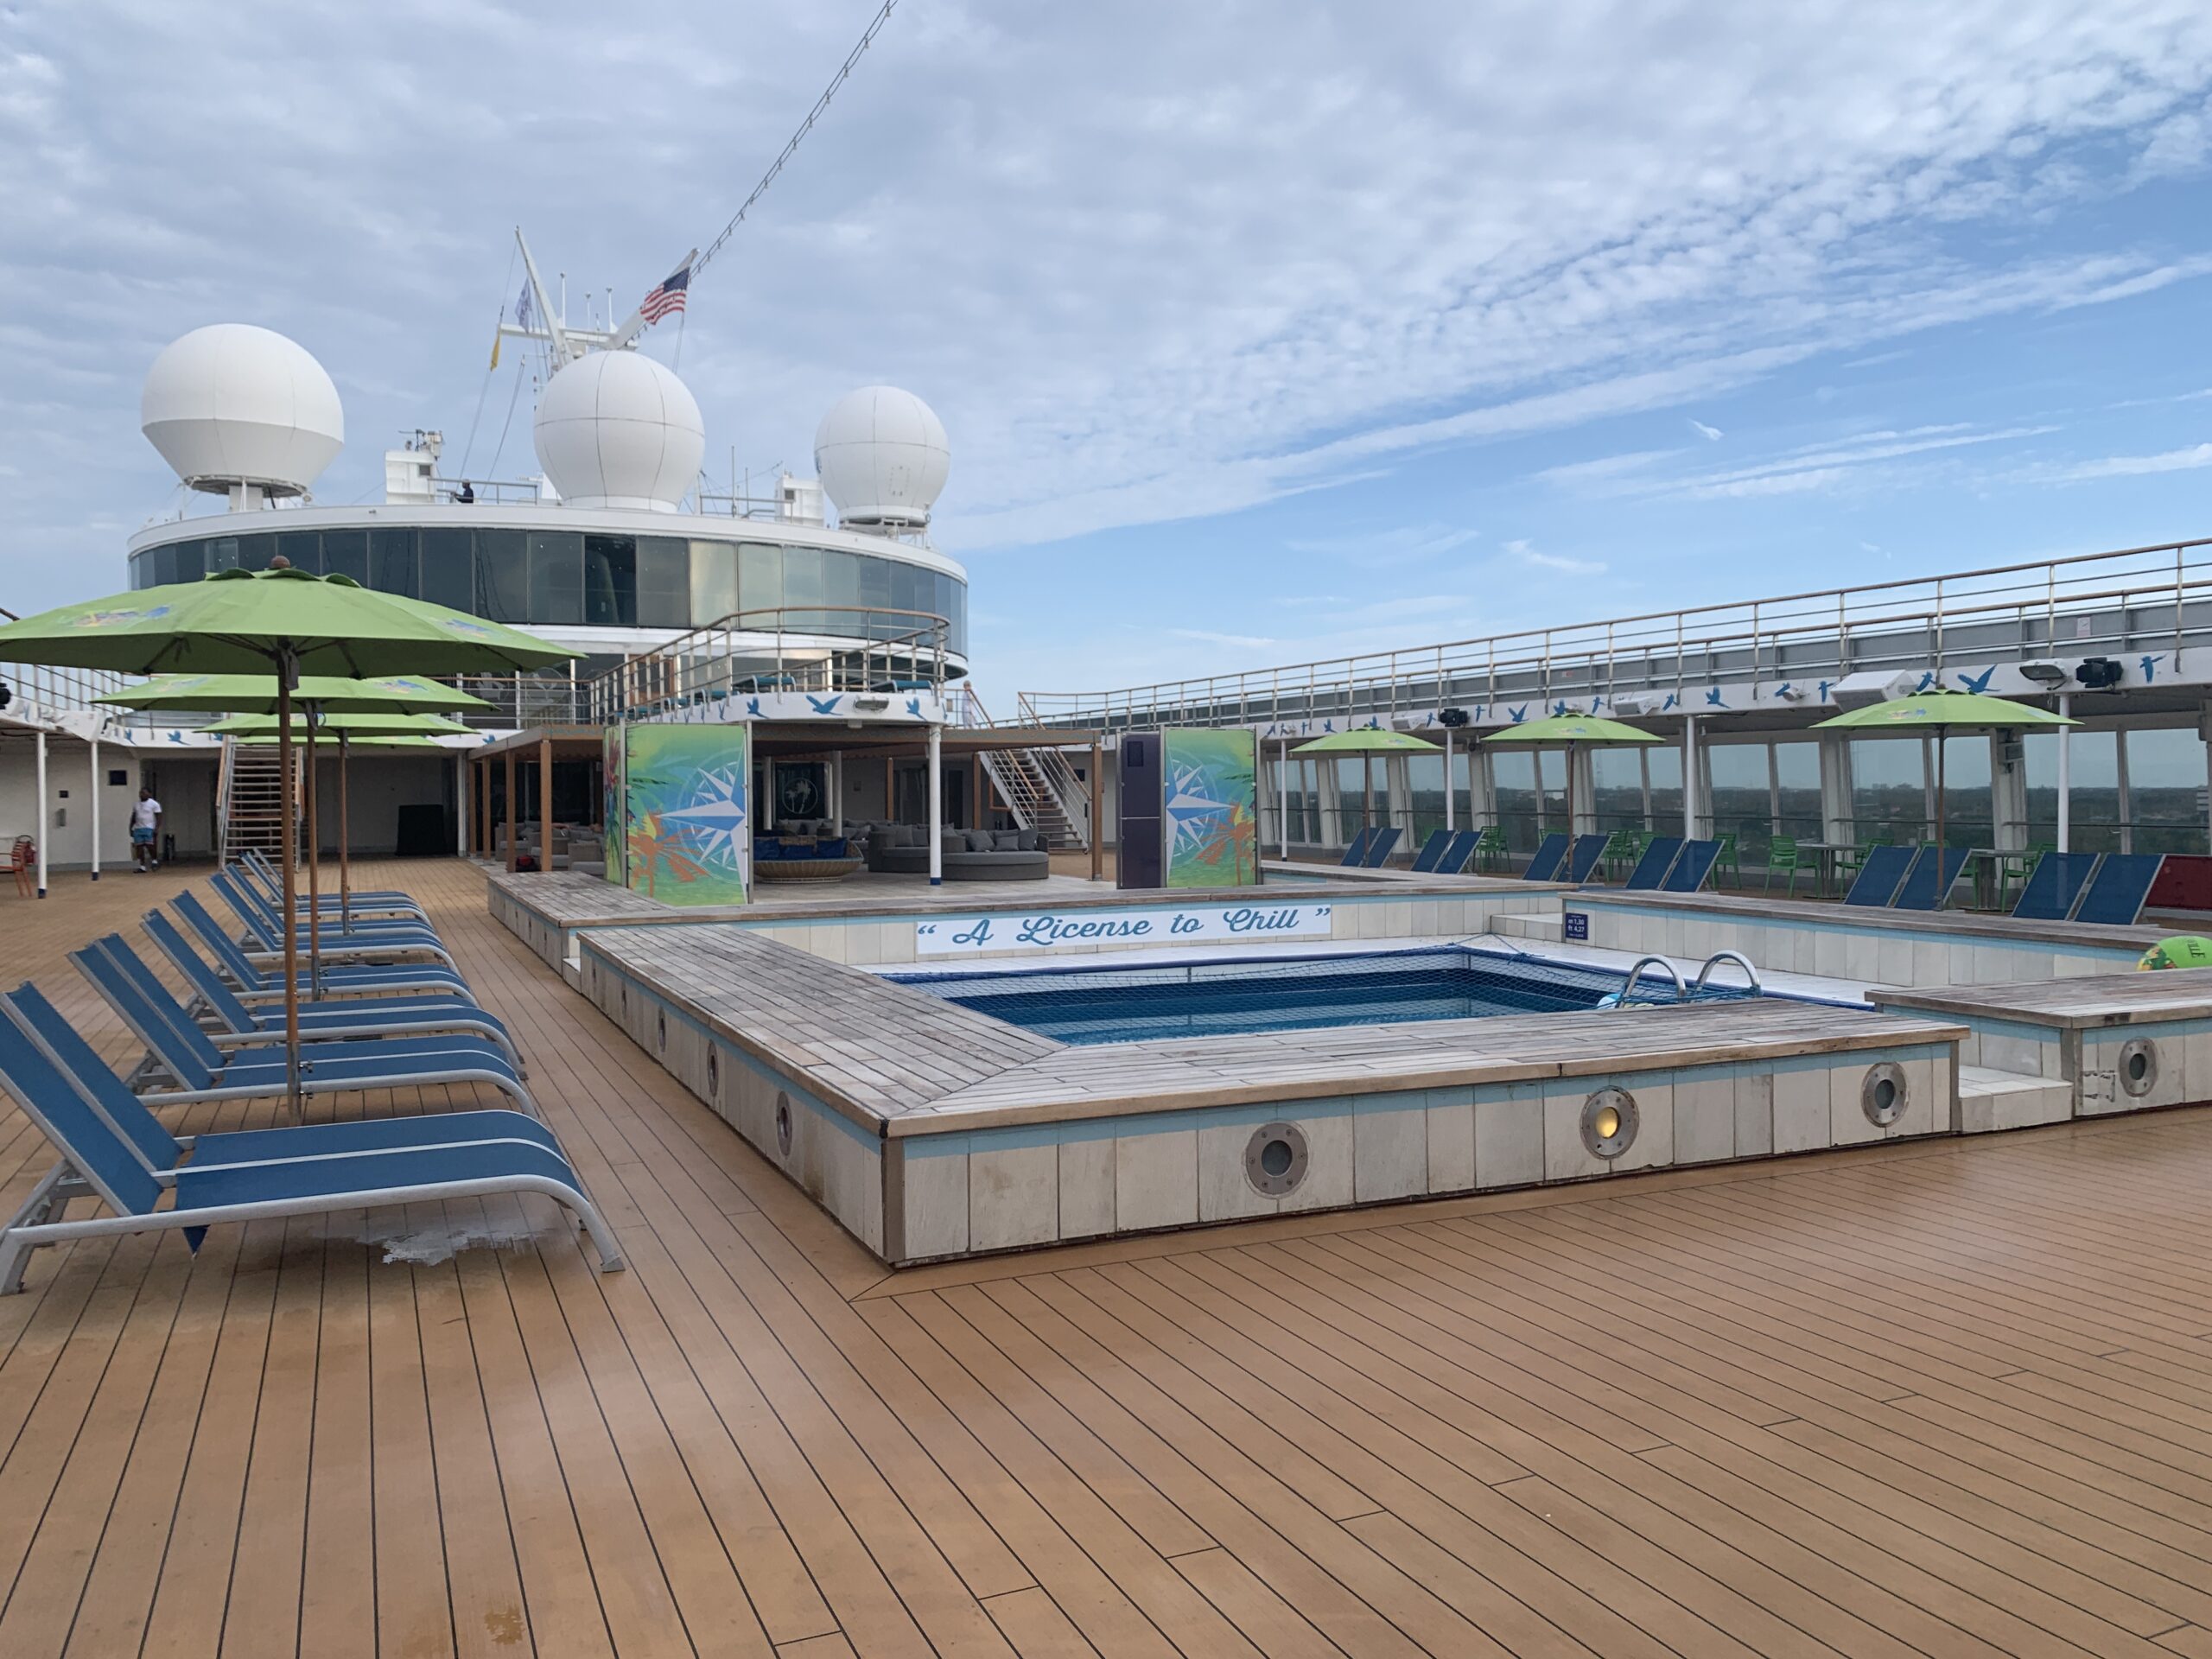 The pool deck at the Margaritaville At Sea cruise